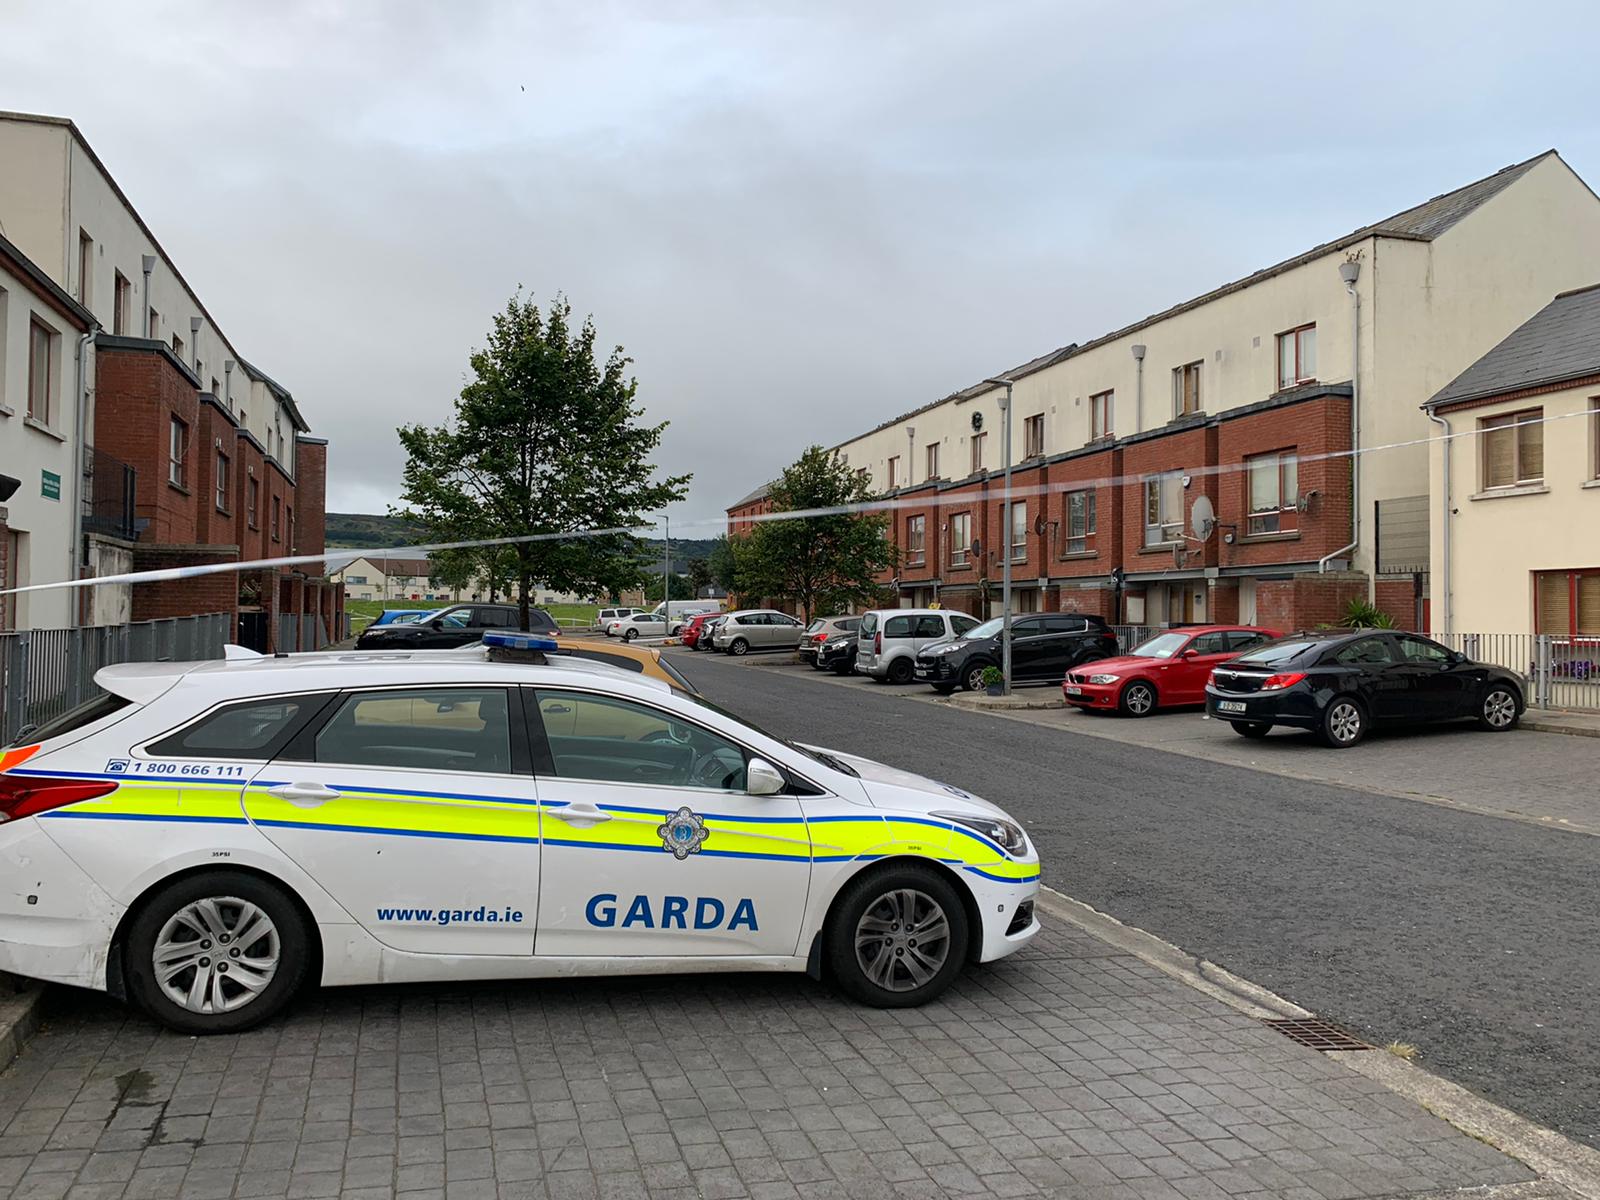 Gardaí at the scene of a fatal stabbing at Mac Uilliam Road in Tallaght, 11-08-2021